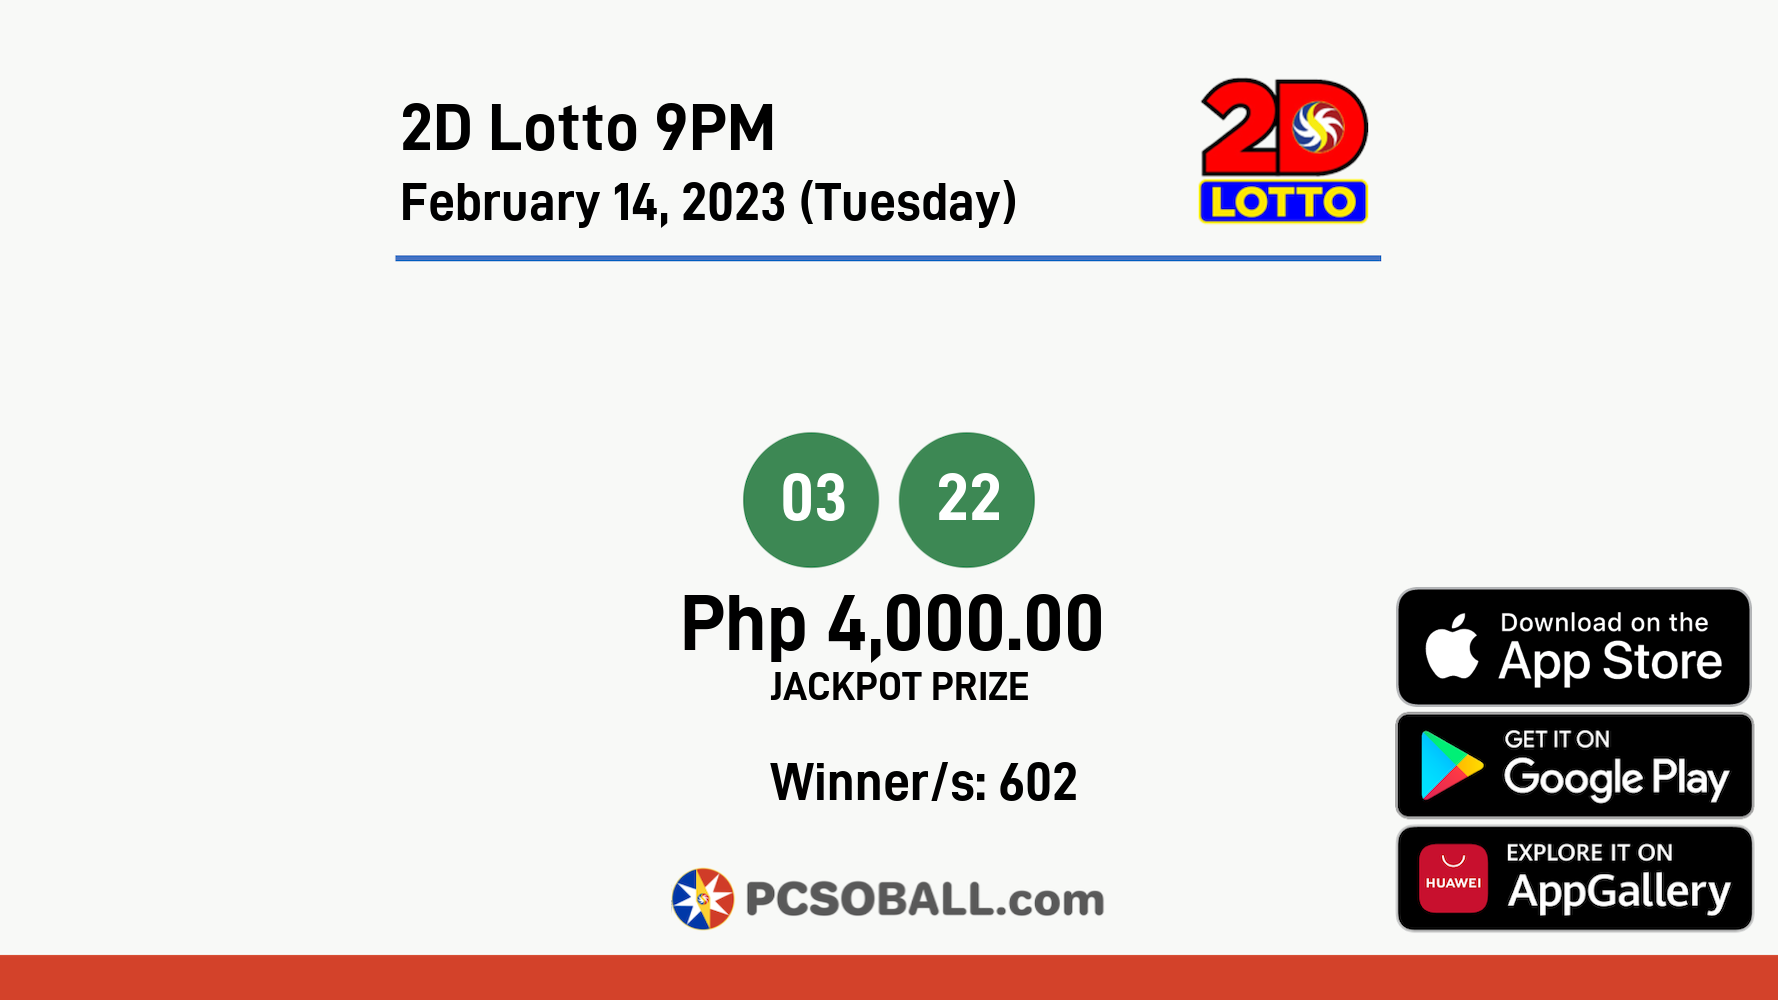 2D Lotto 9PM February 14, 2023 (Tuesday) Result